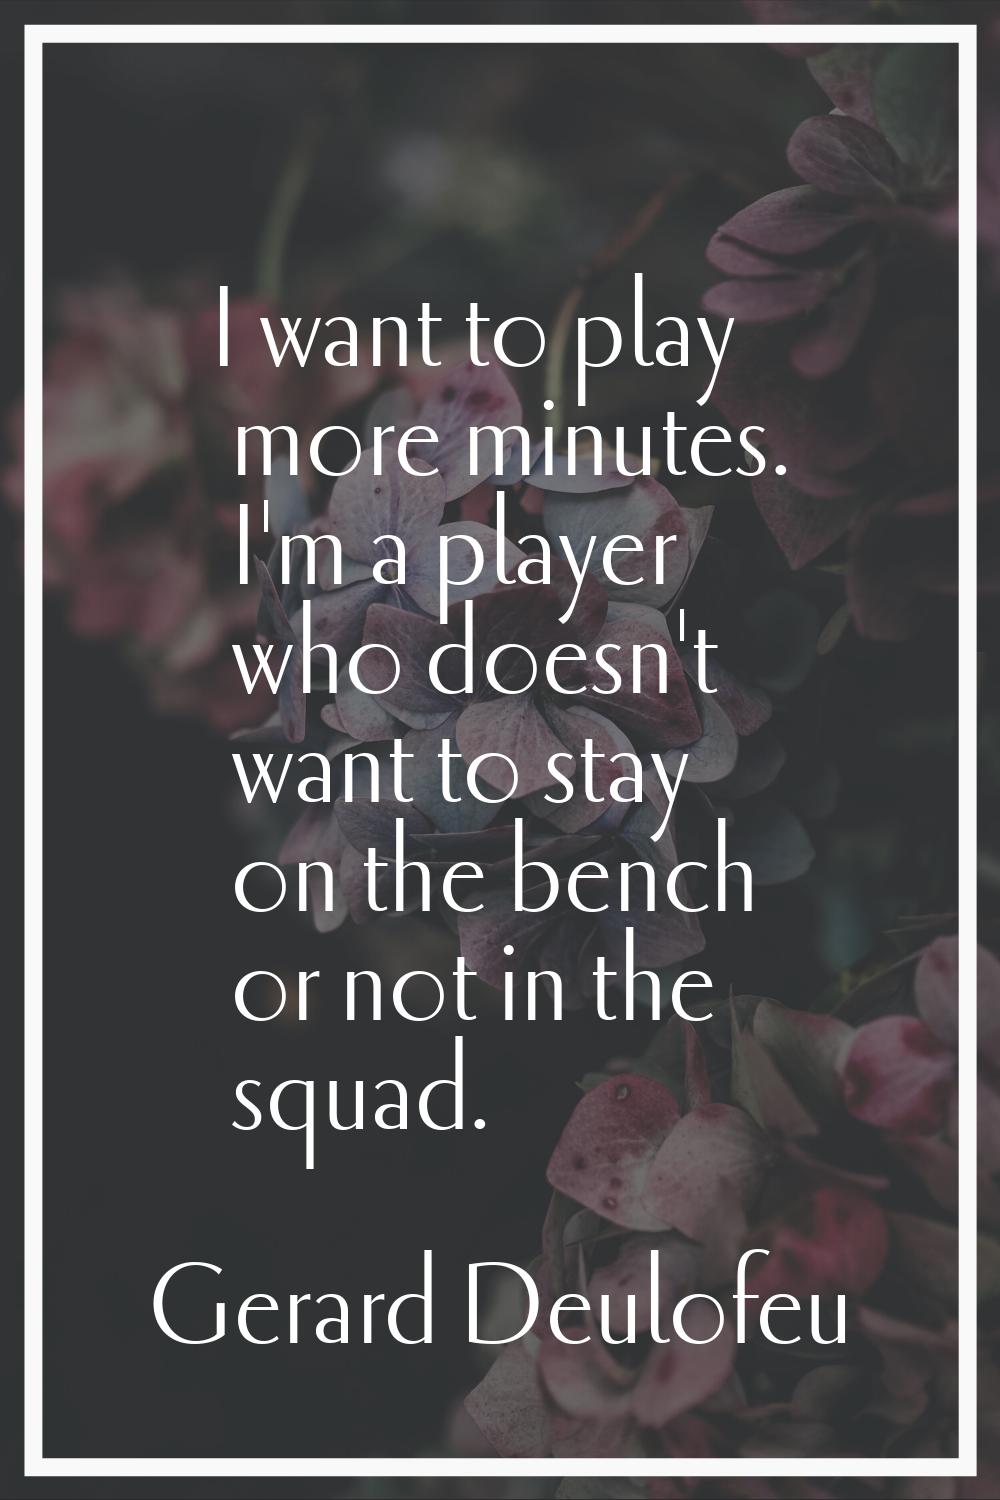 I want to play more minutes. I'm a player who doesn't want to stay on the bench or not in the squad